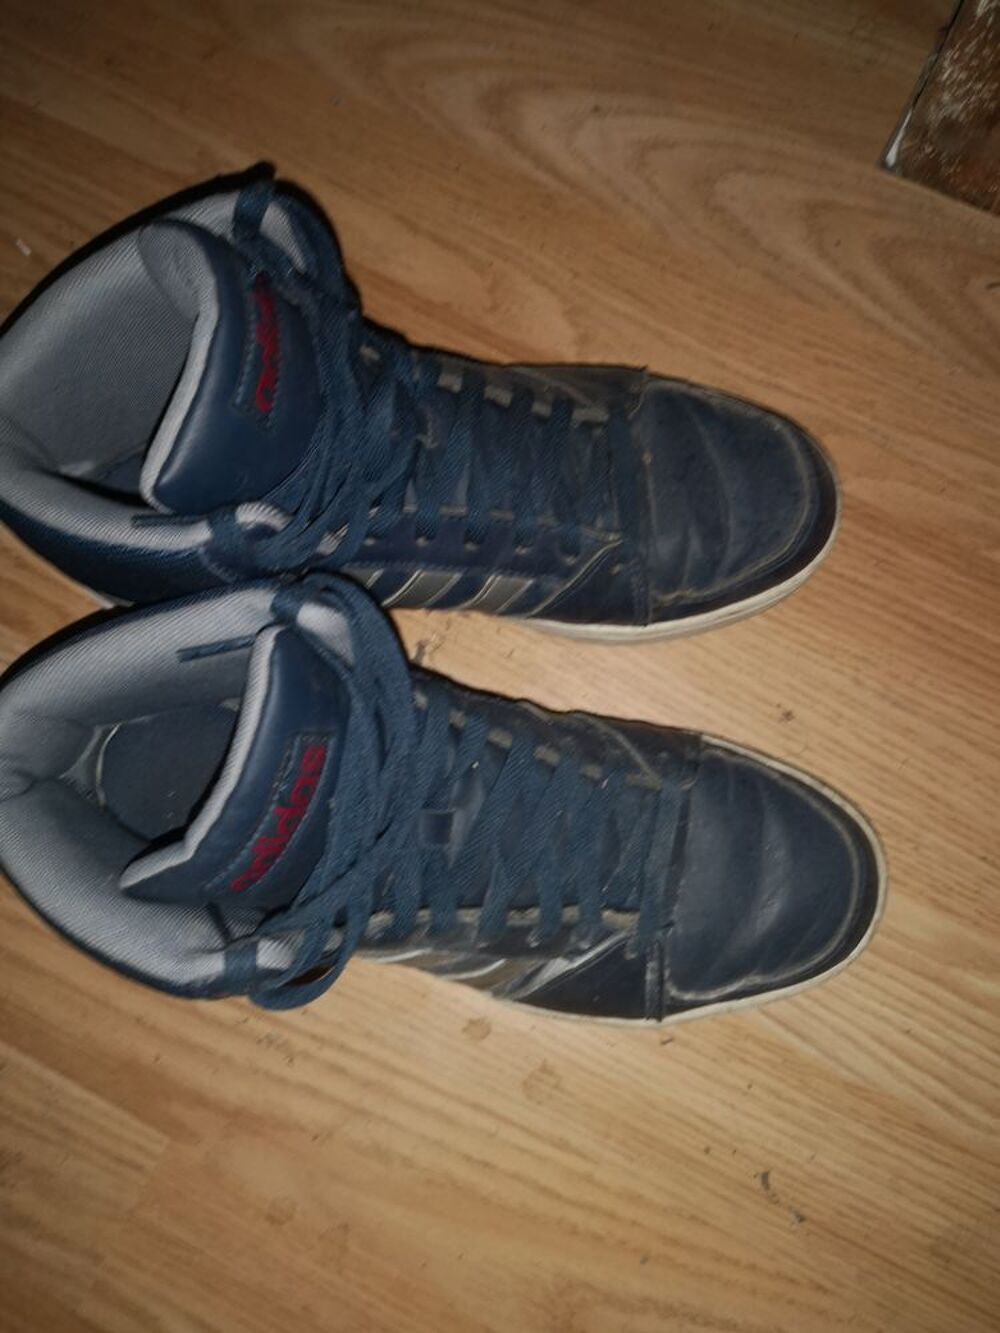 Basket Adidas montante Chaussures